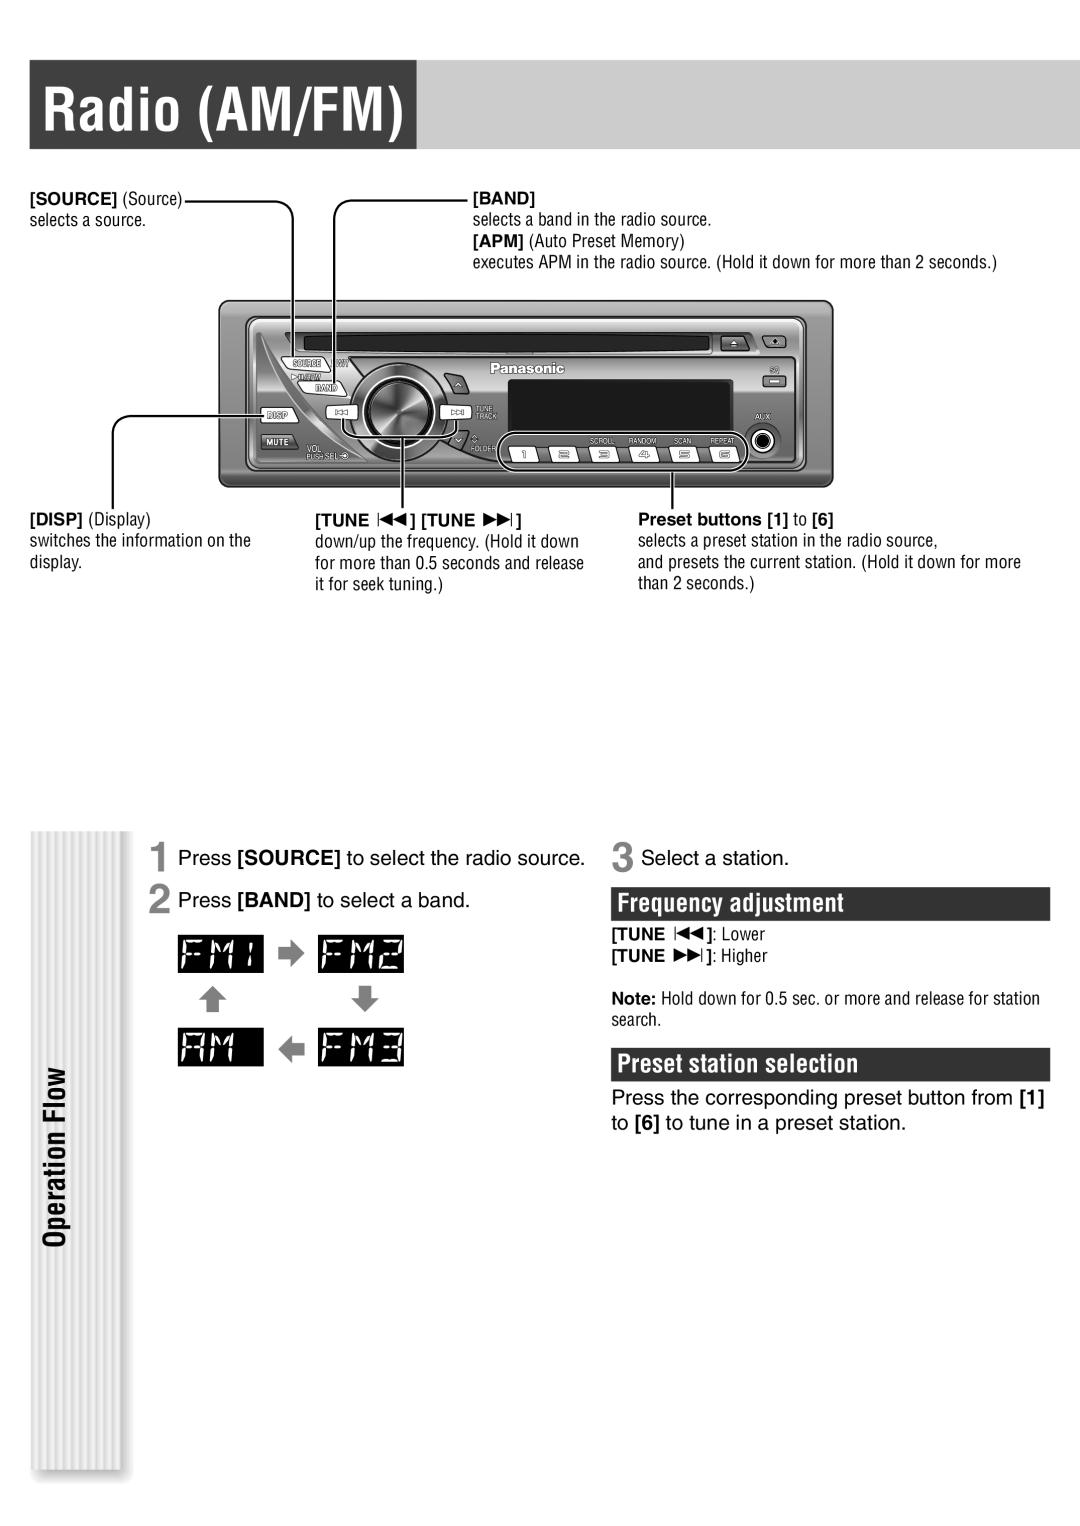 Panasonic C1305L Radio AM/FM, Operation Flow, Frequency adjustment, Preset station selection, SOURCE Source, Band, search 